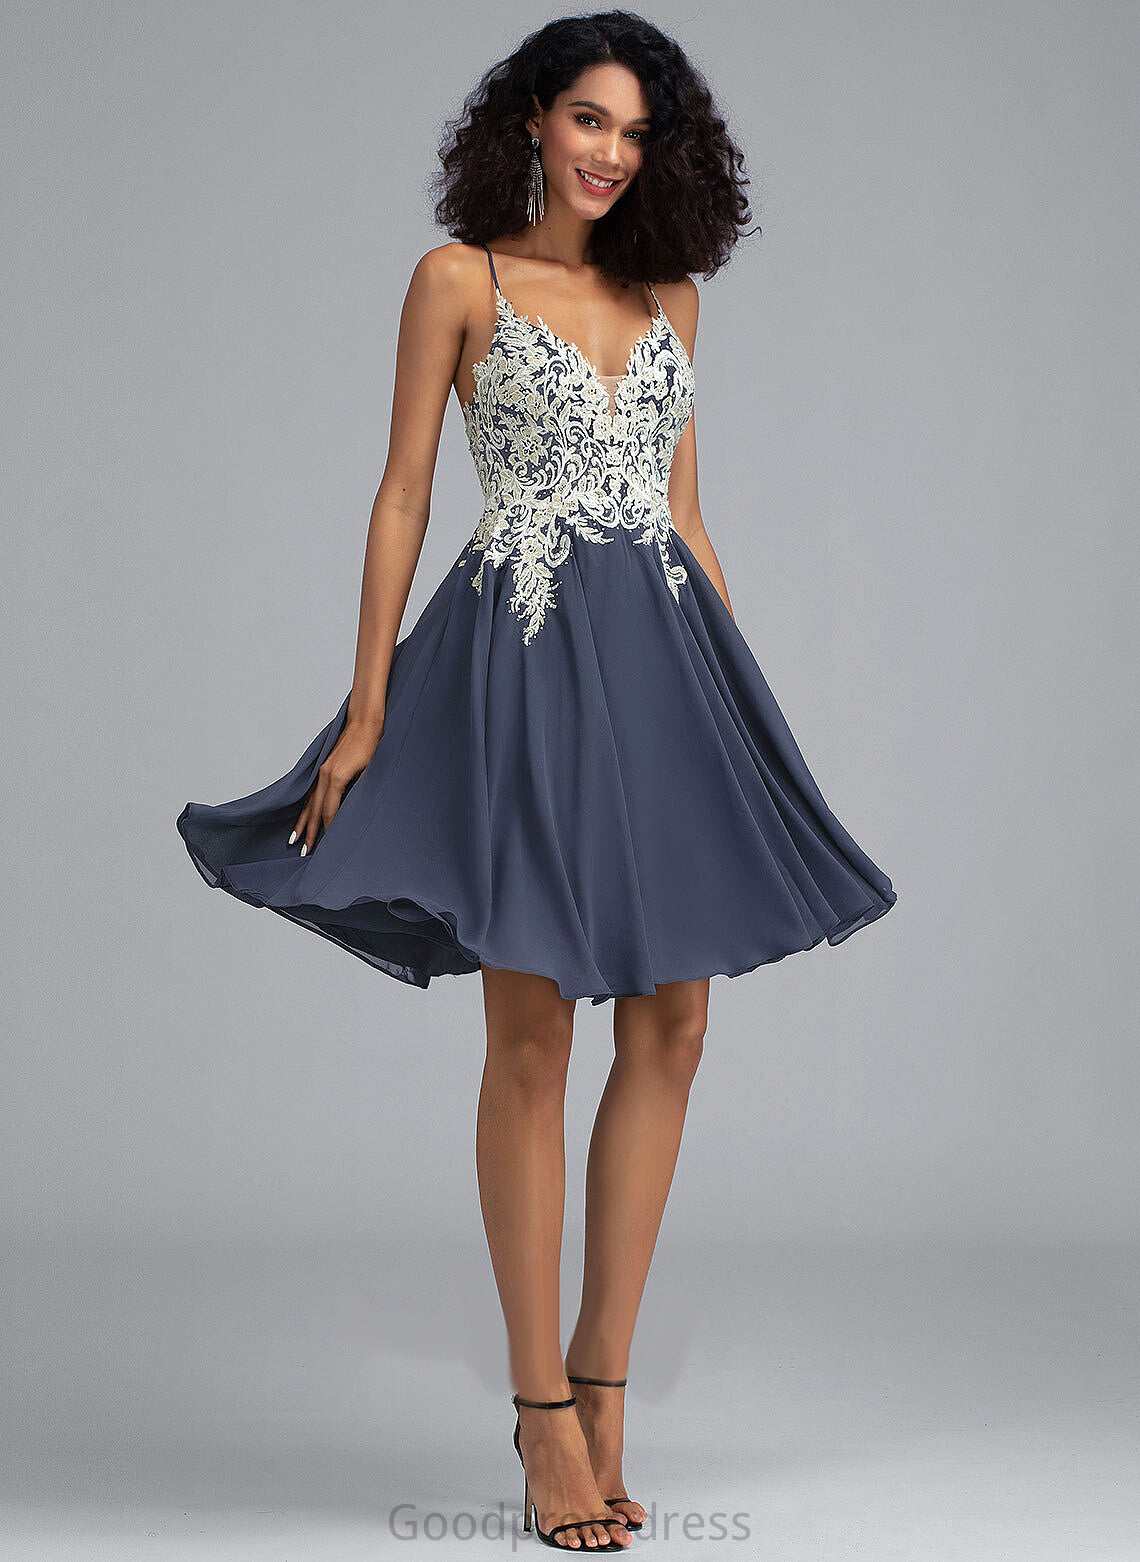 Chiffon Homecoming With V-neck Dress Homecoming Dresses Short/Mini Sequins Beading Hayden A-Line Lace